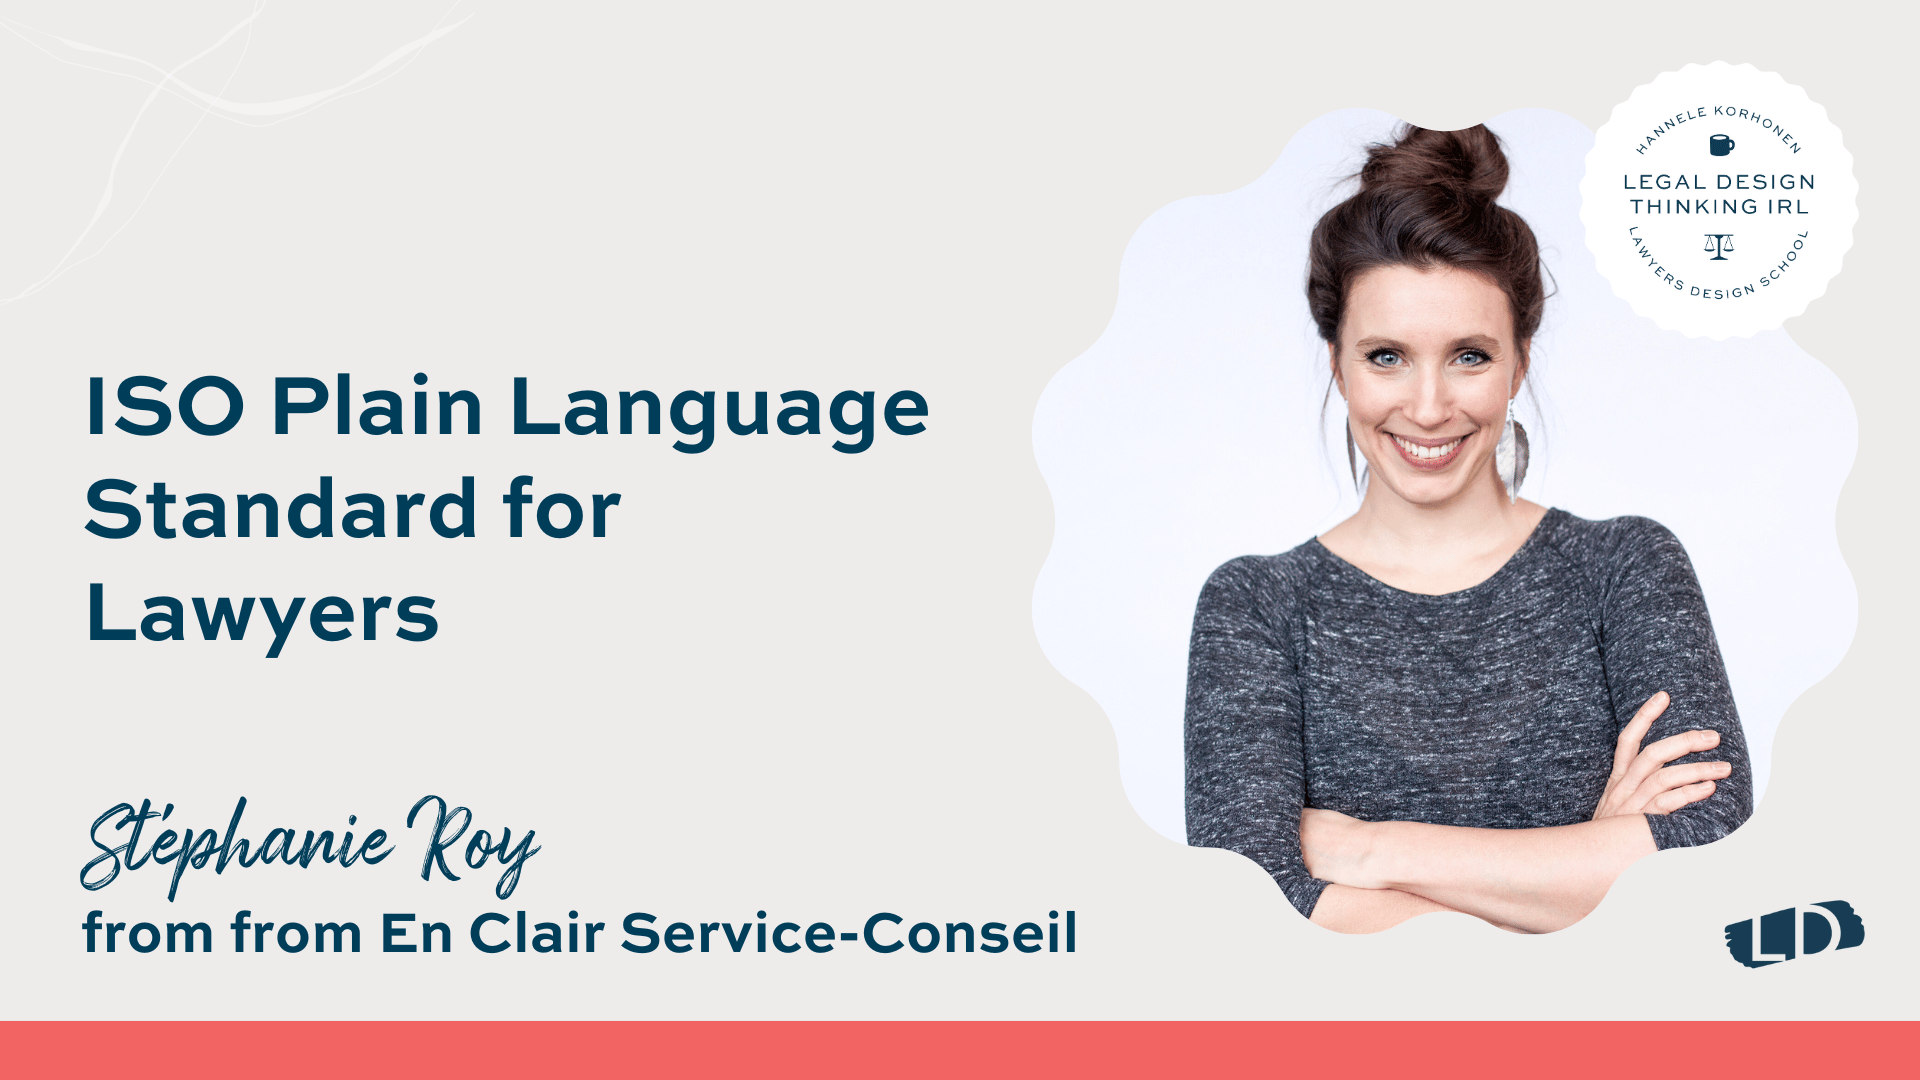 ISO Plain Language Standard for Lawyers and Stéphanie Roy, from En Clair